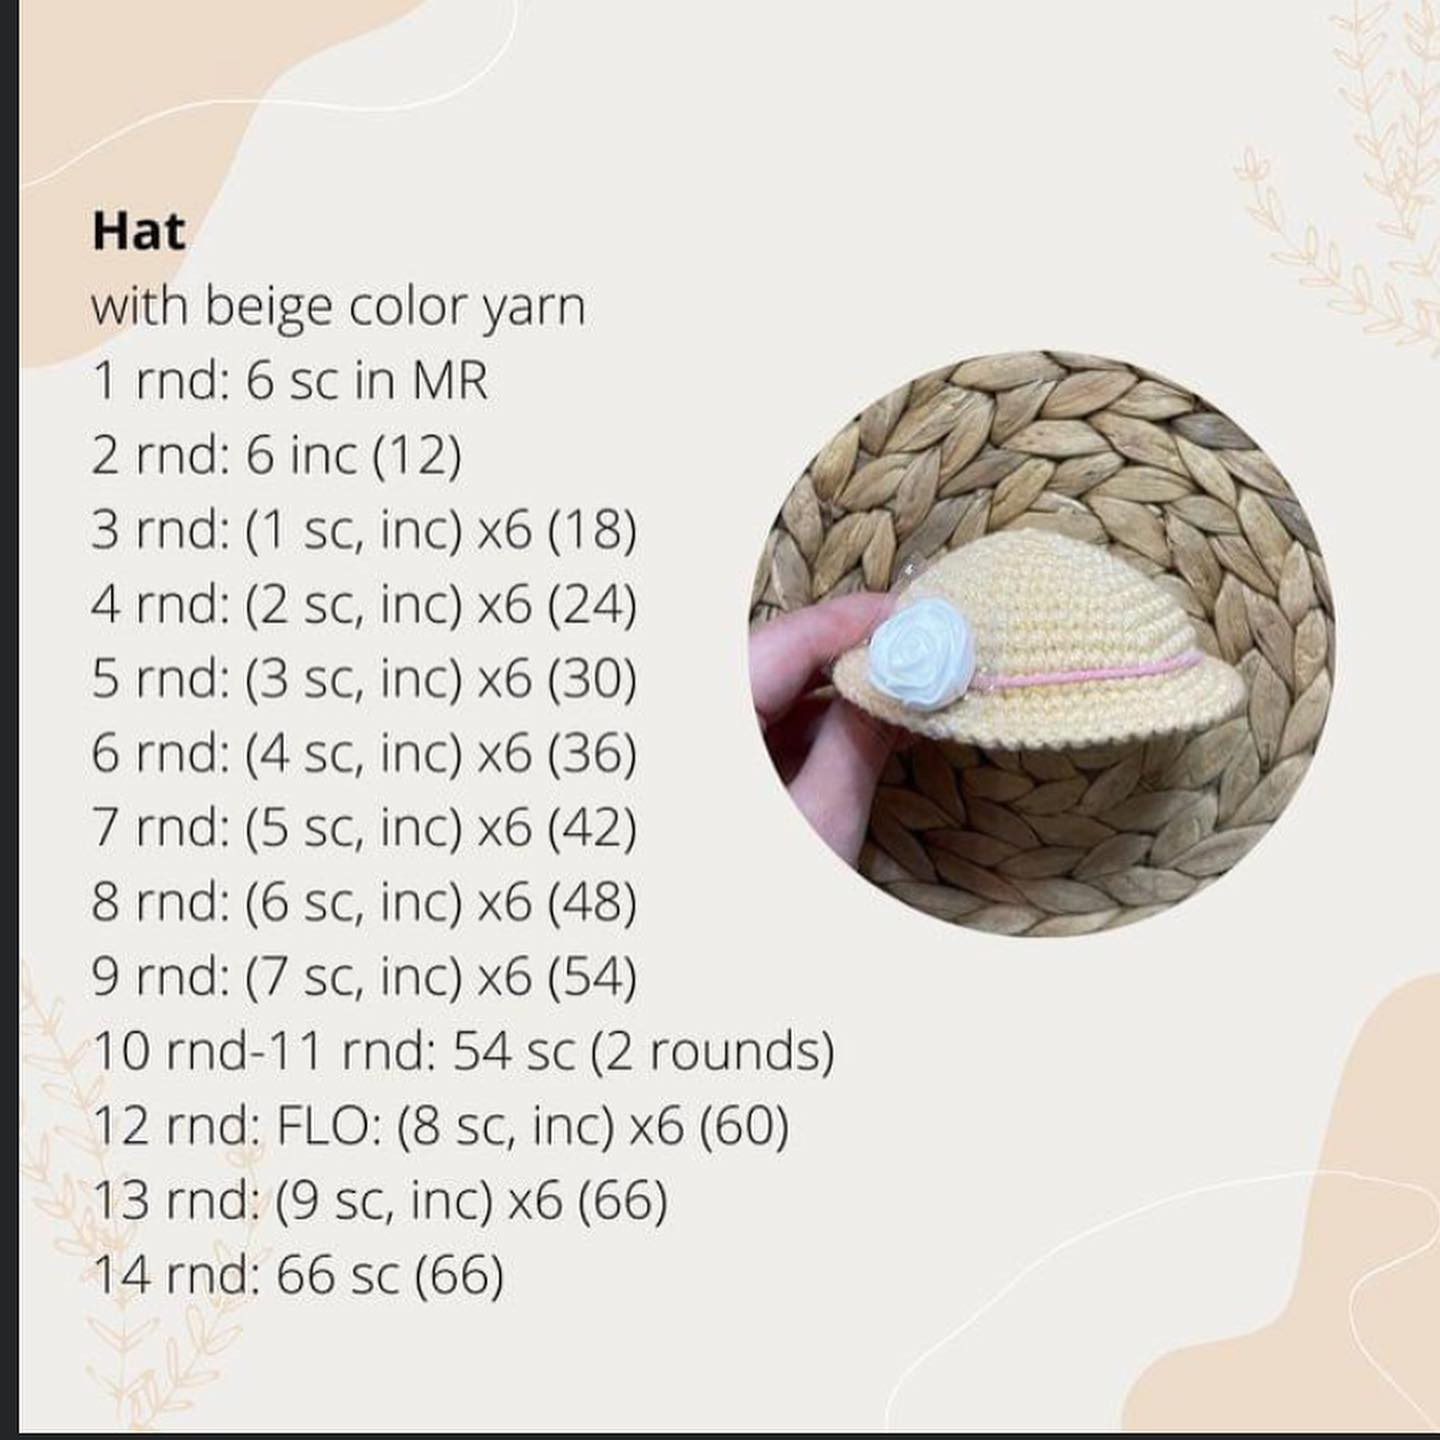 White goose wool crochet pattern with a brown hat.